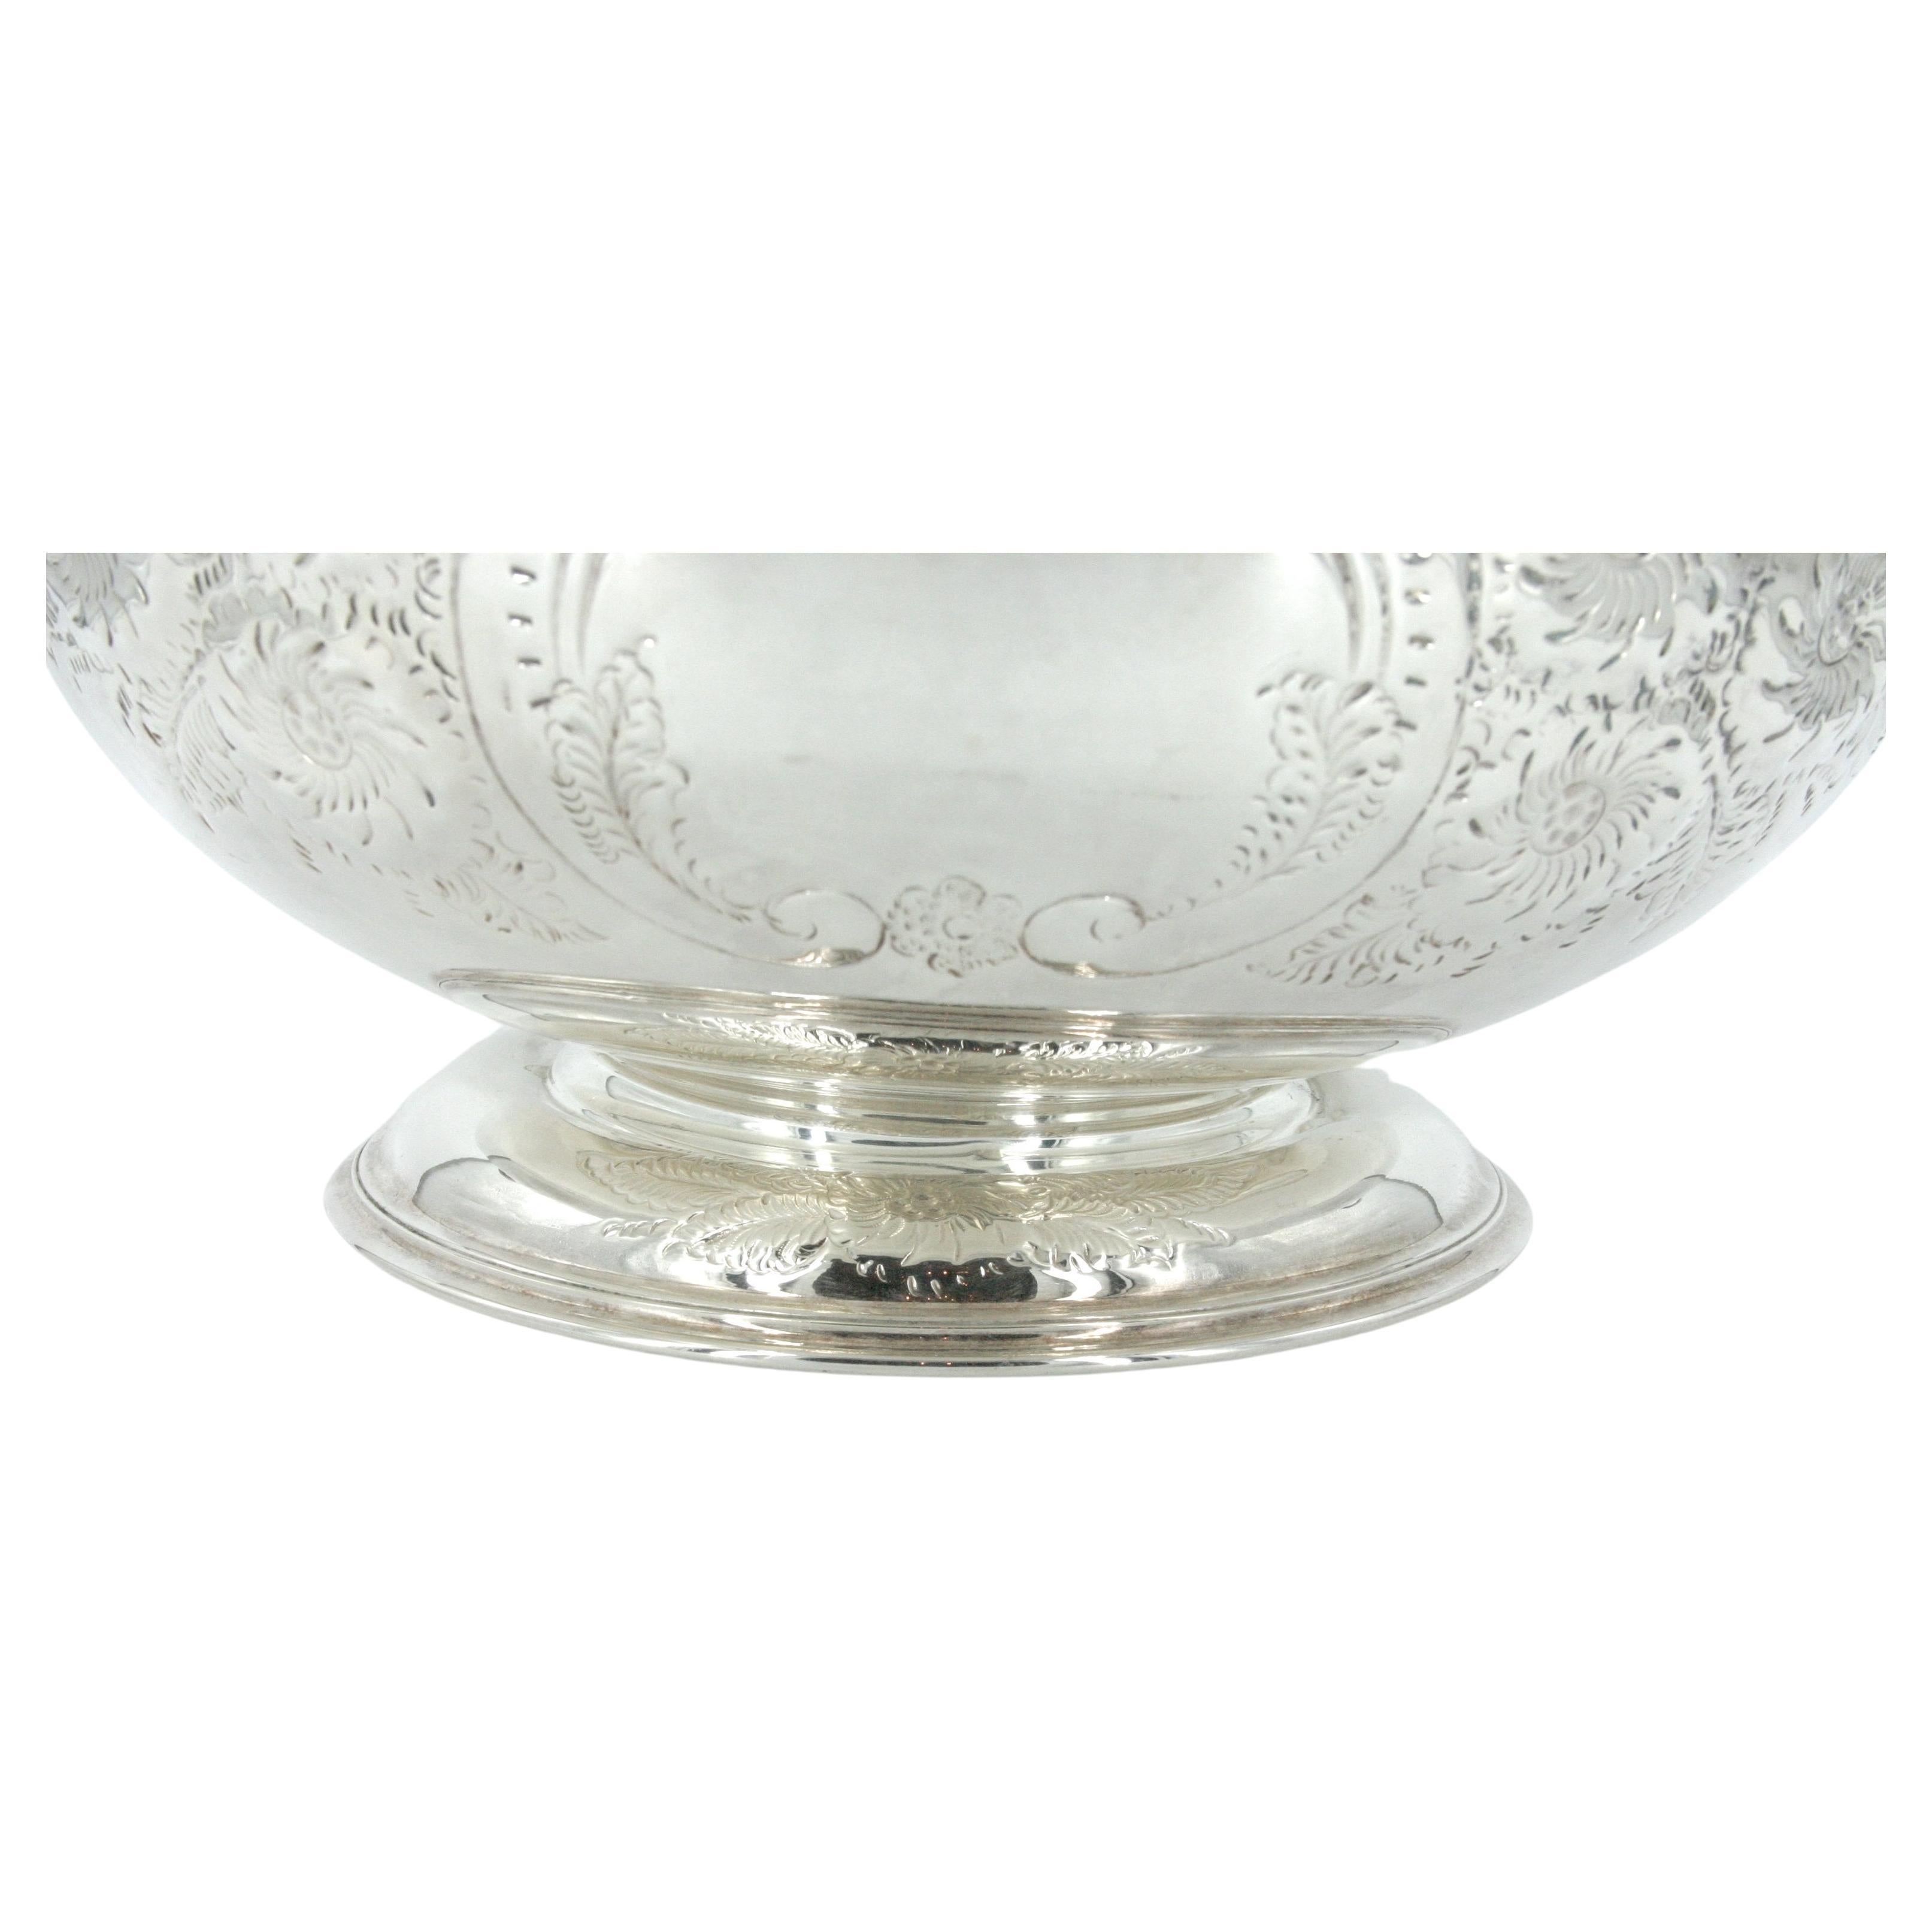 Mid-20th Century Large English Sheffield Punch Bowl / Cooler